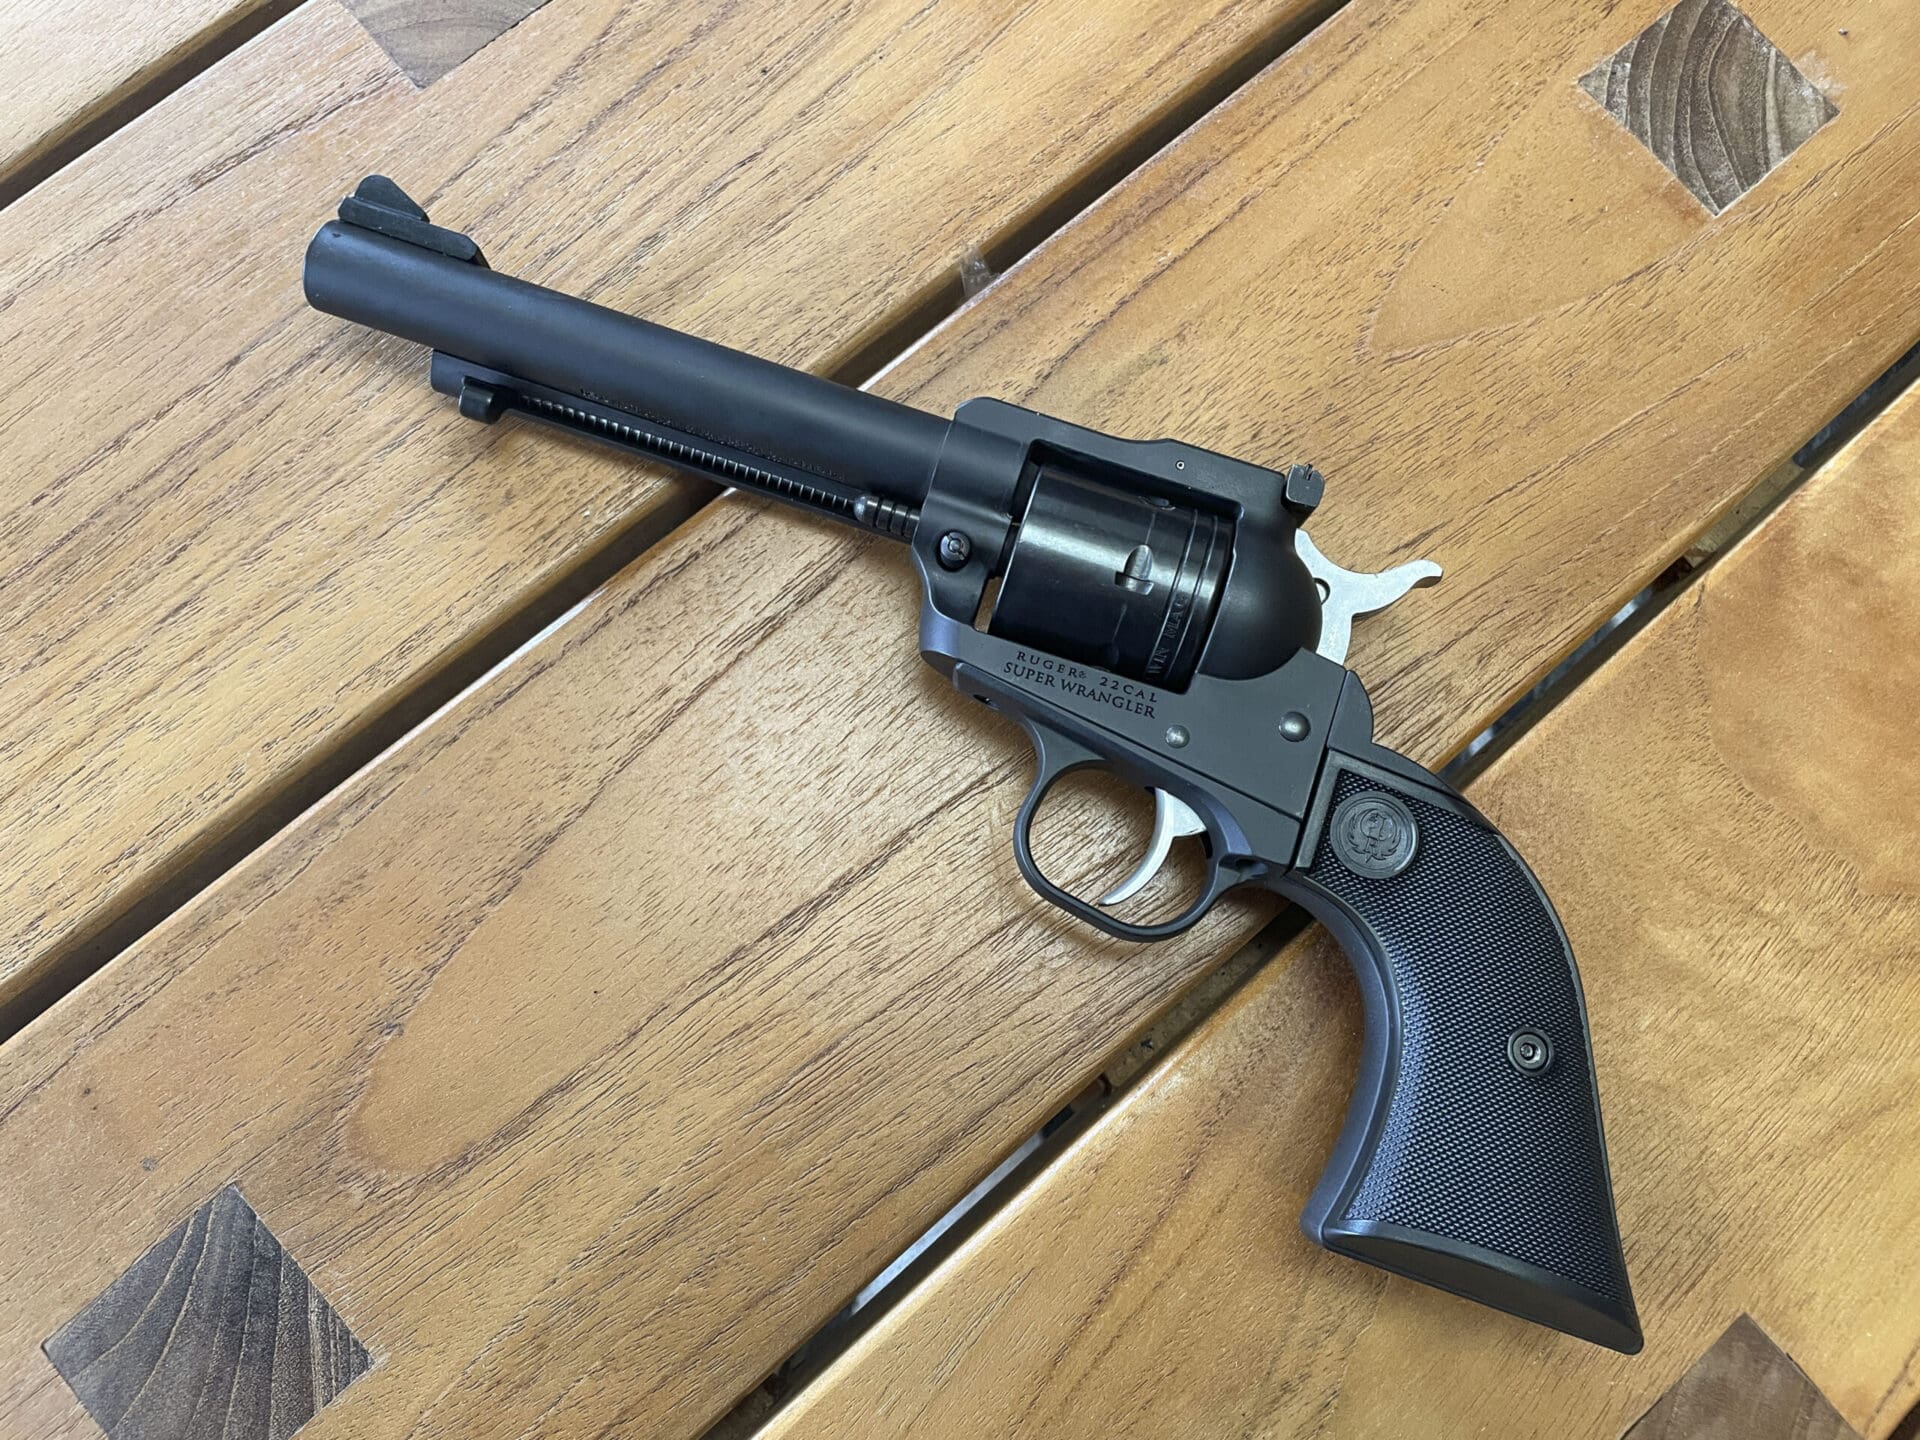 Gun Review: Ruger Super Wrangler Single Action .22 Revolver - The Truth  About Guns